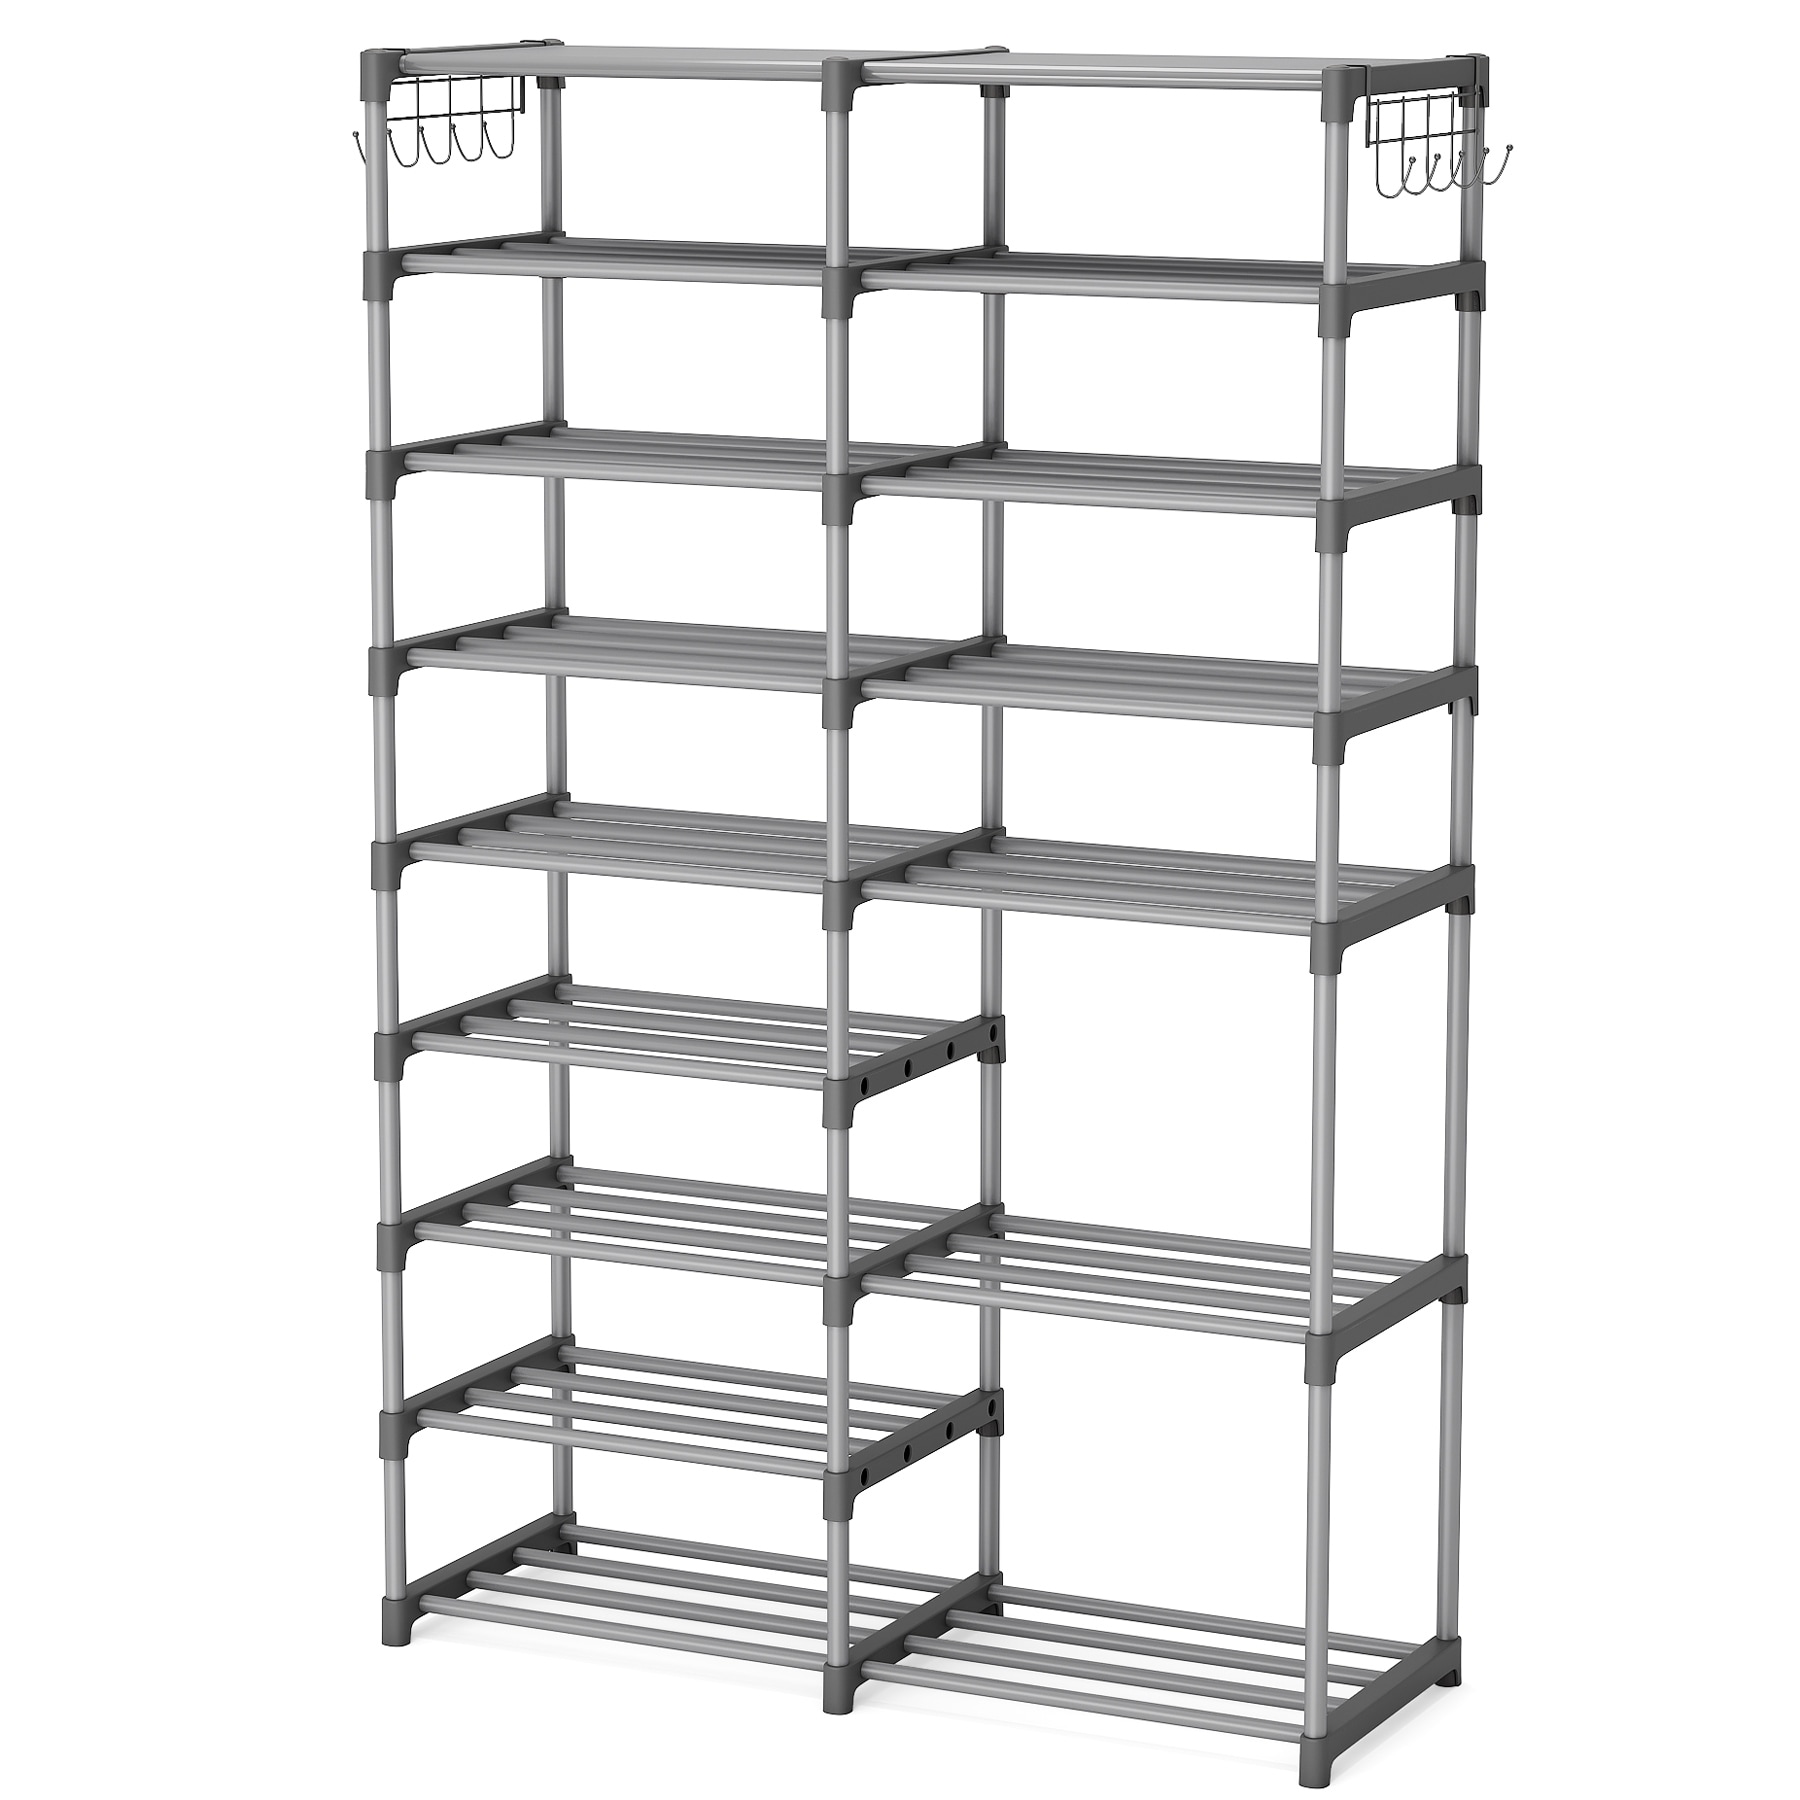 https://ak1.ostkcdn.com/images/products/is/images/direct/54f9ae6b887f21b0e769418660888a2baea85cca/32-40-Pairs-Shoe-and-Boot-Storage-Shelf-Rack-Organizer-with-Hooks%2C9-Tiers-Stackable-Shoes-Stand-Tower-for-Closet.jpg